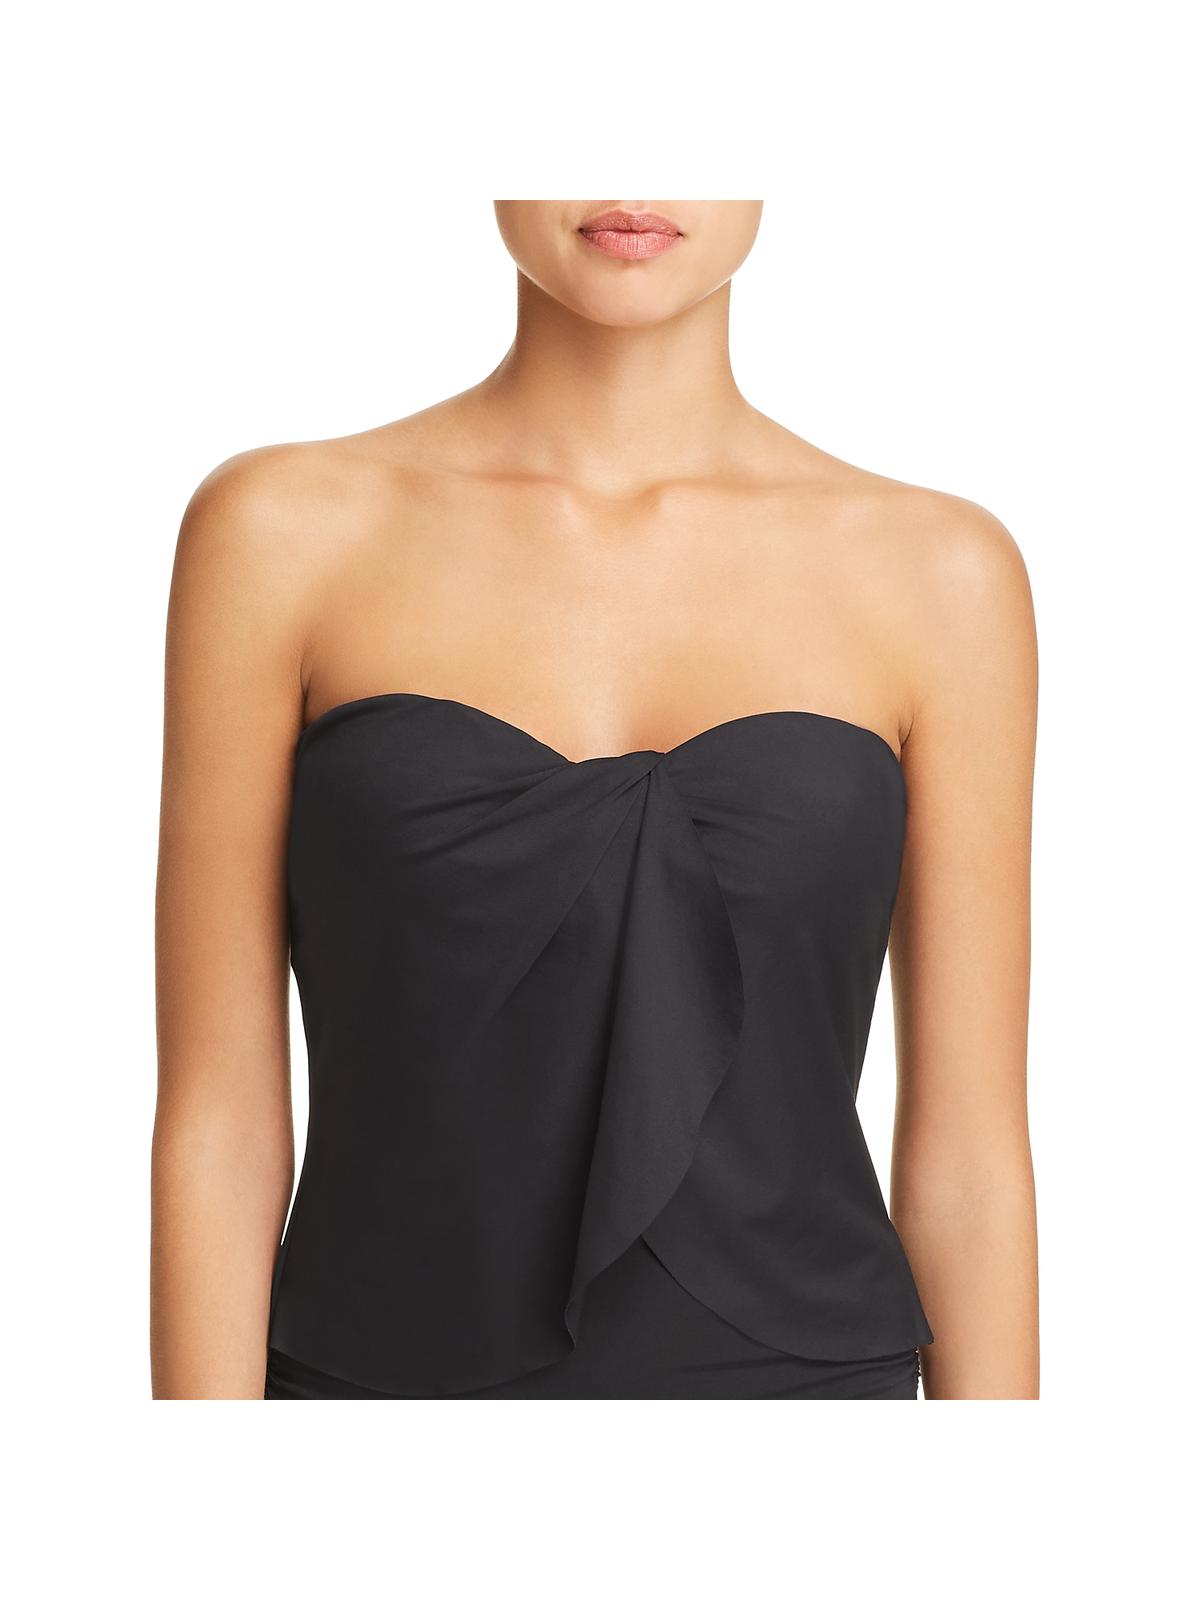 Vince Camuto Womens Halter Ruched Tankini Swim Top - image 1 of 2